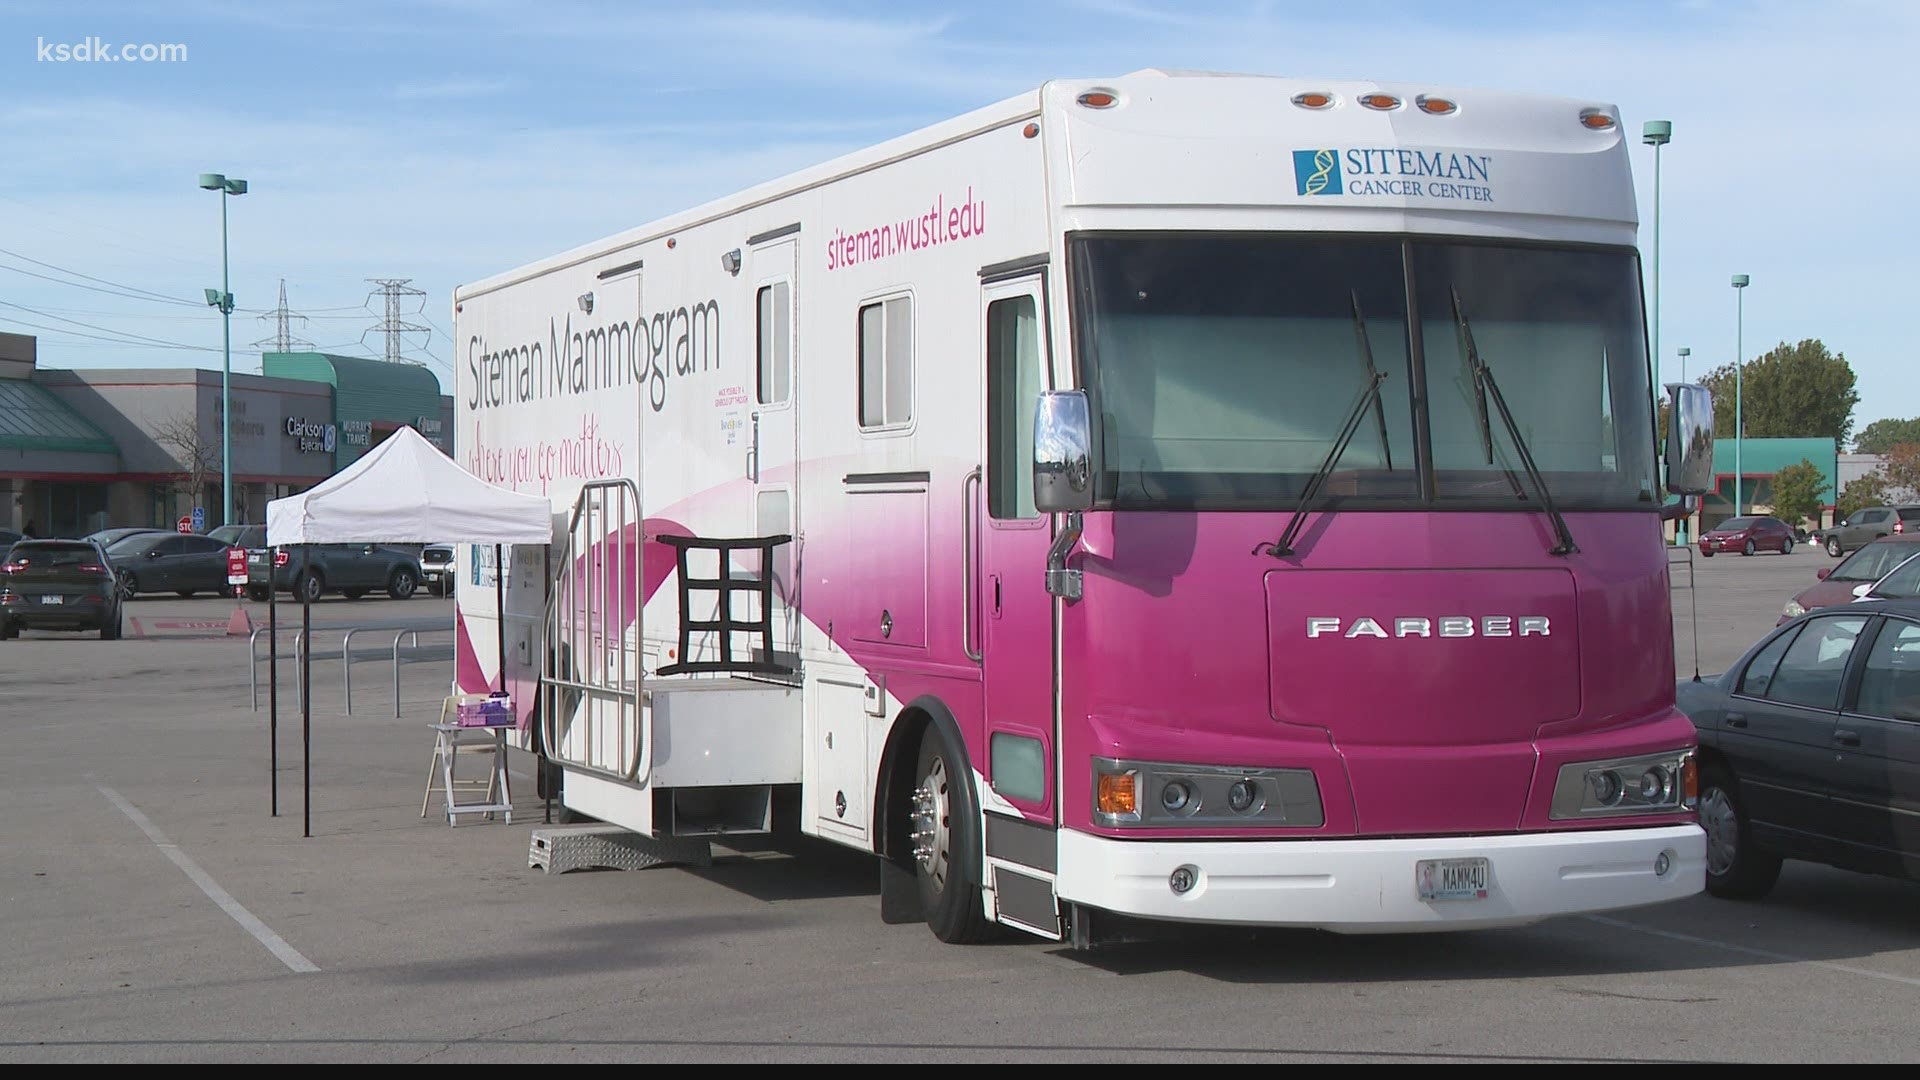 The Siteman Cancer Center mammography van is traveling to locations across the St. Louis area all October.